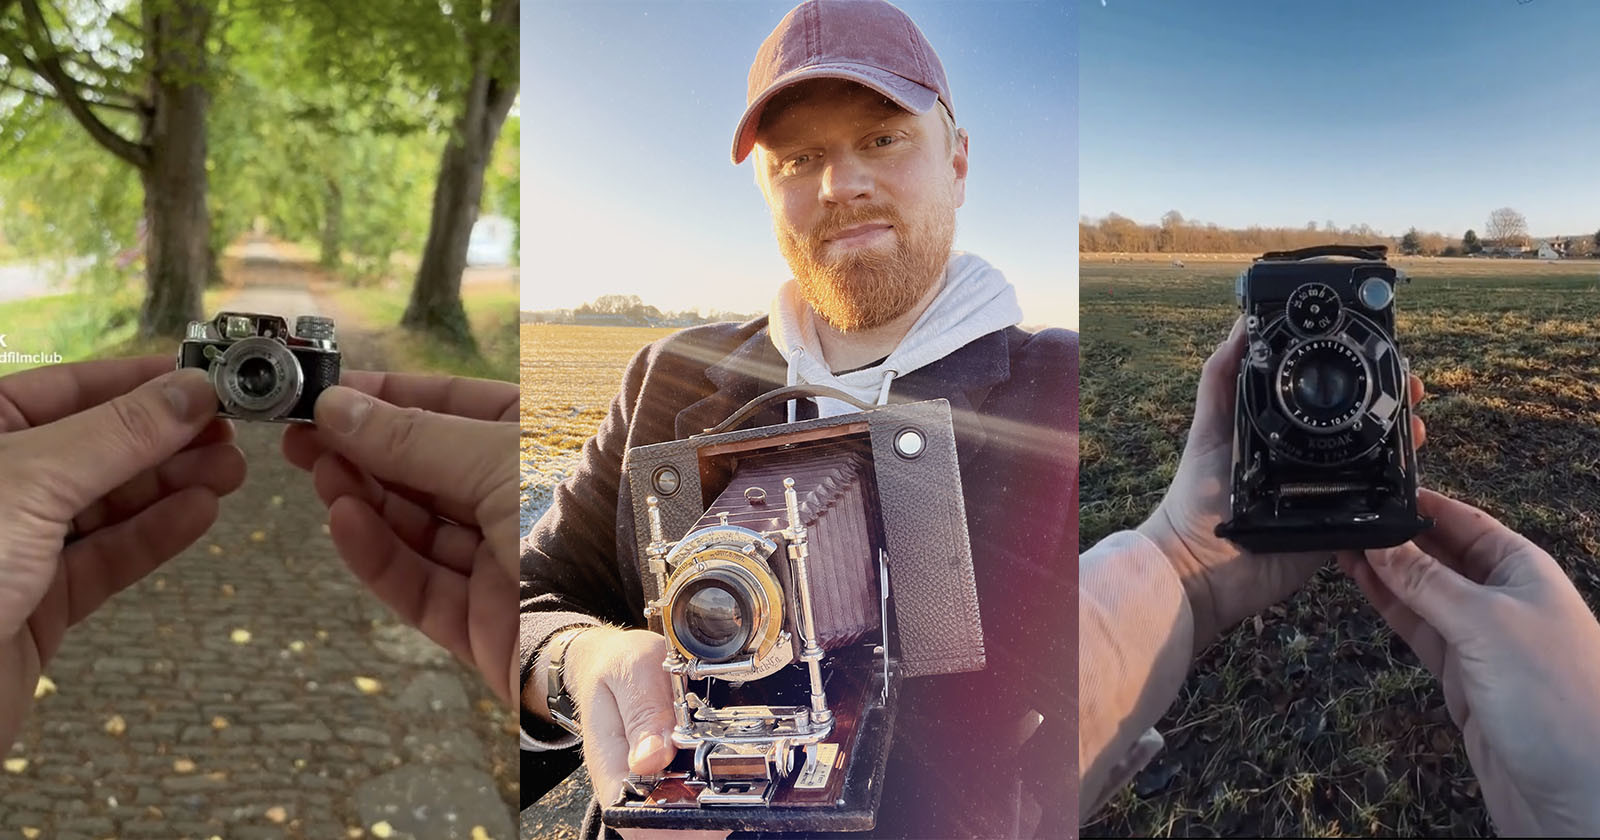  photographer becomes internet hit expired film 